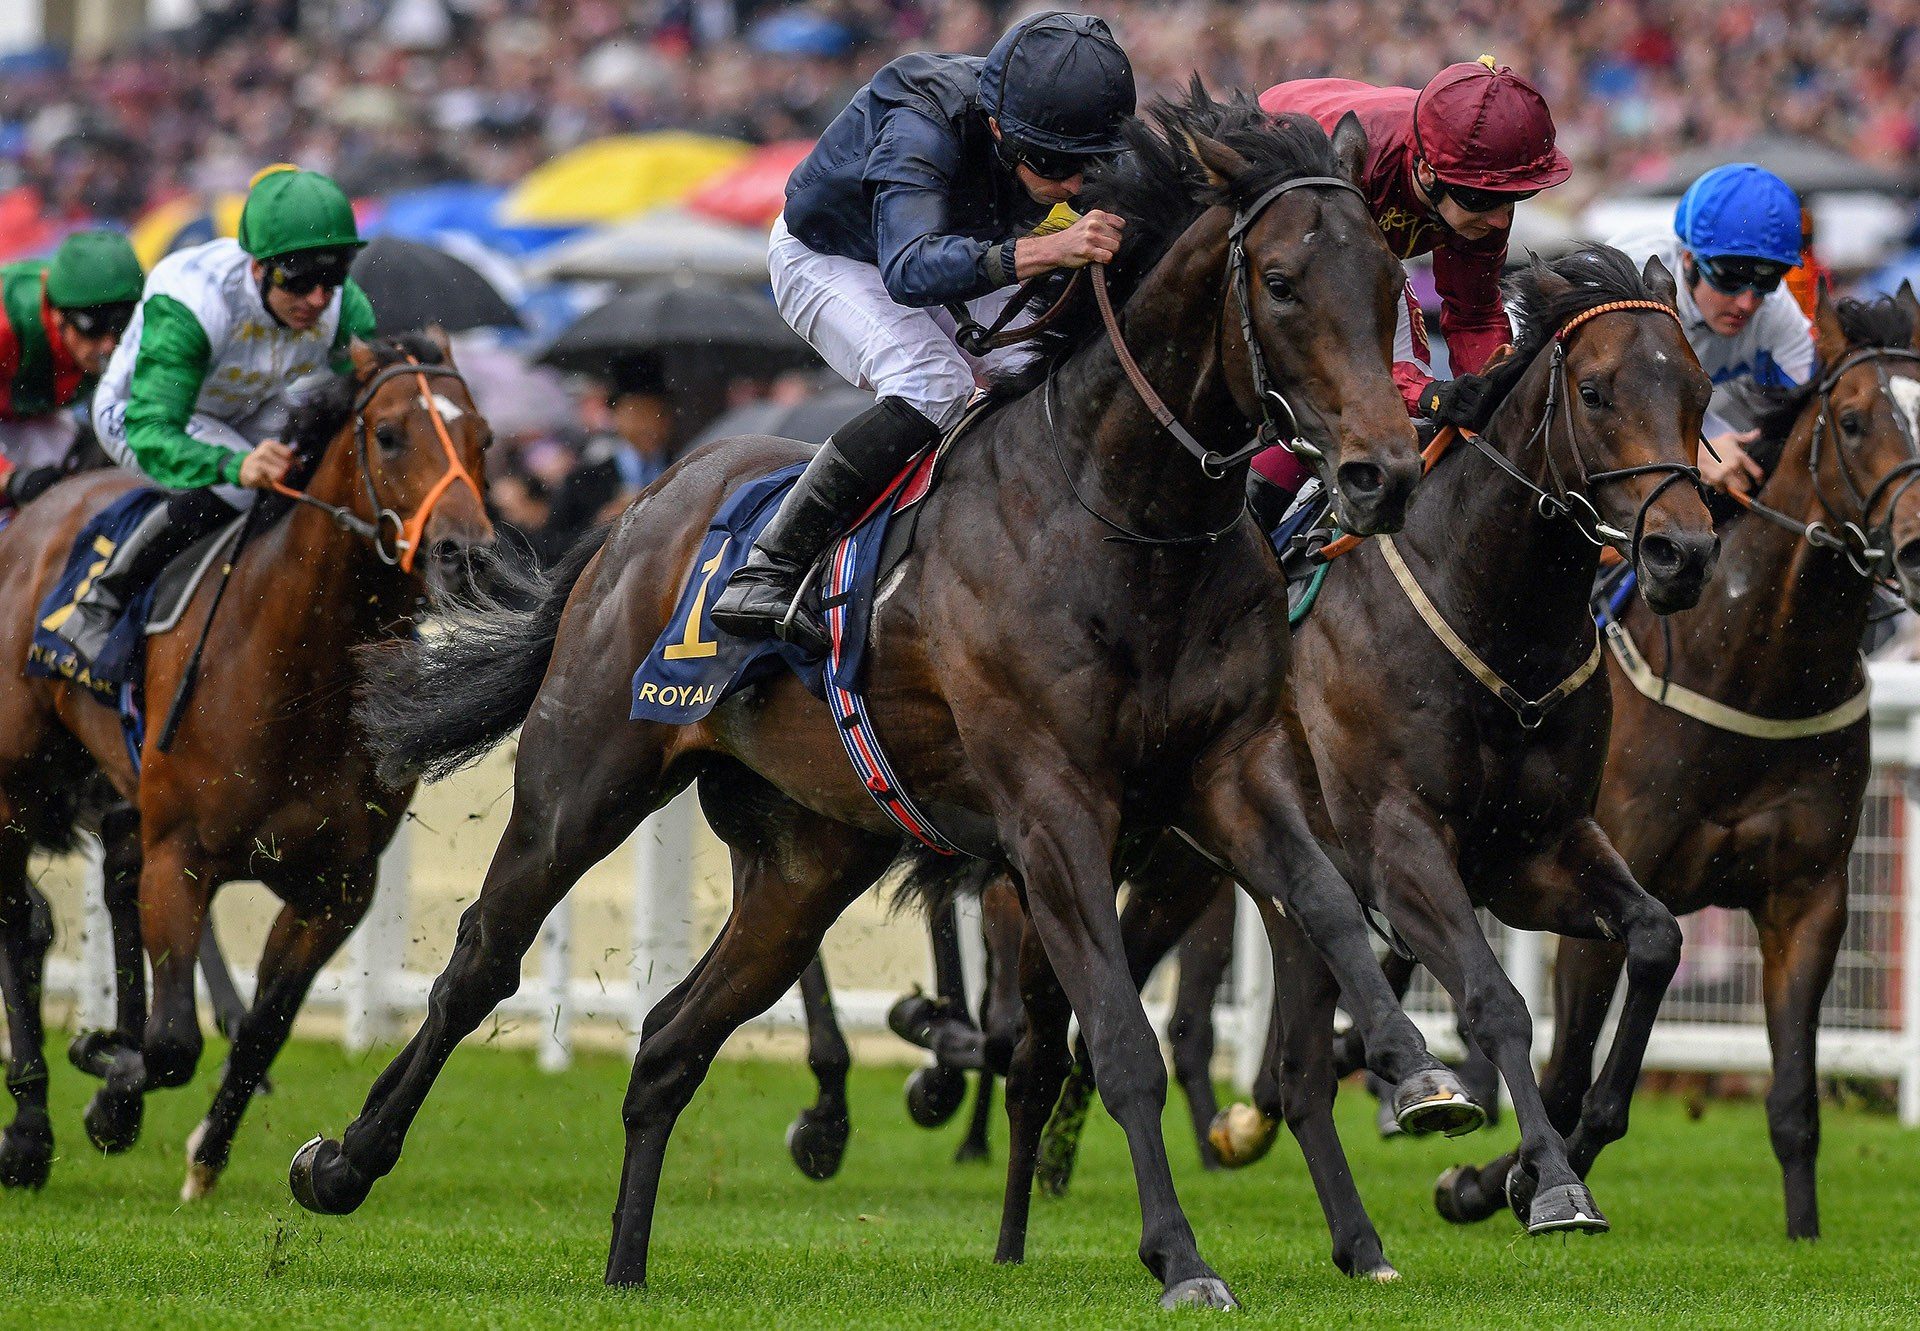 Arizona winning the Gr.2 Coventry Stakes at Royal Ascot